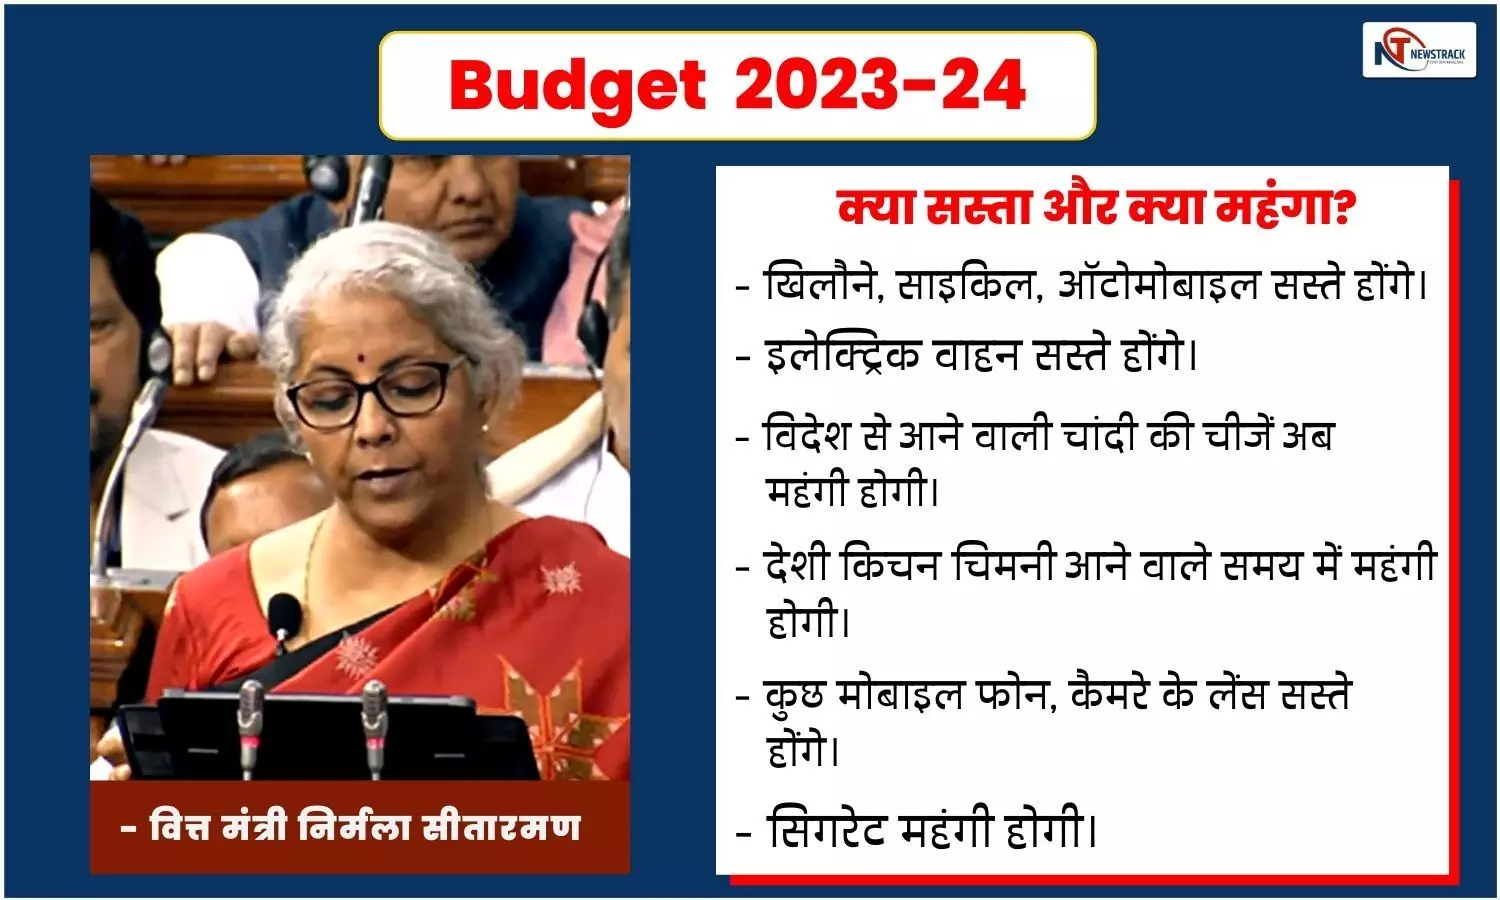 Union Budget 2023-24 List of Cheaper and Costlier Items